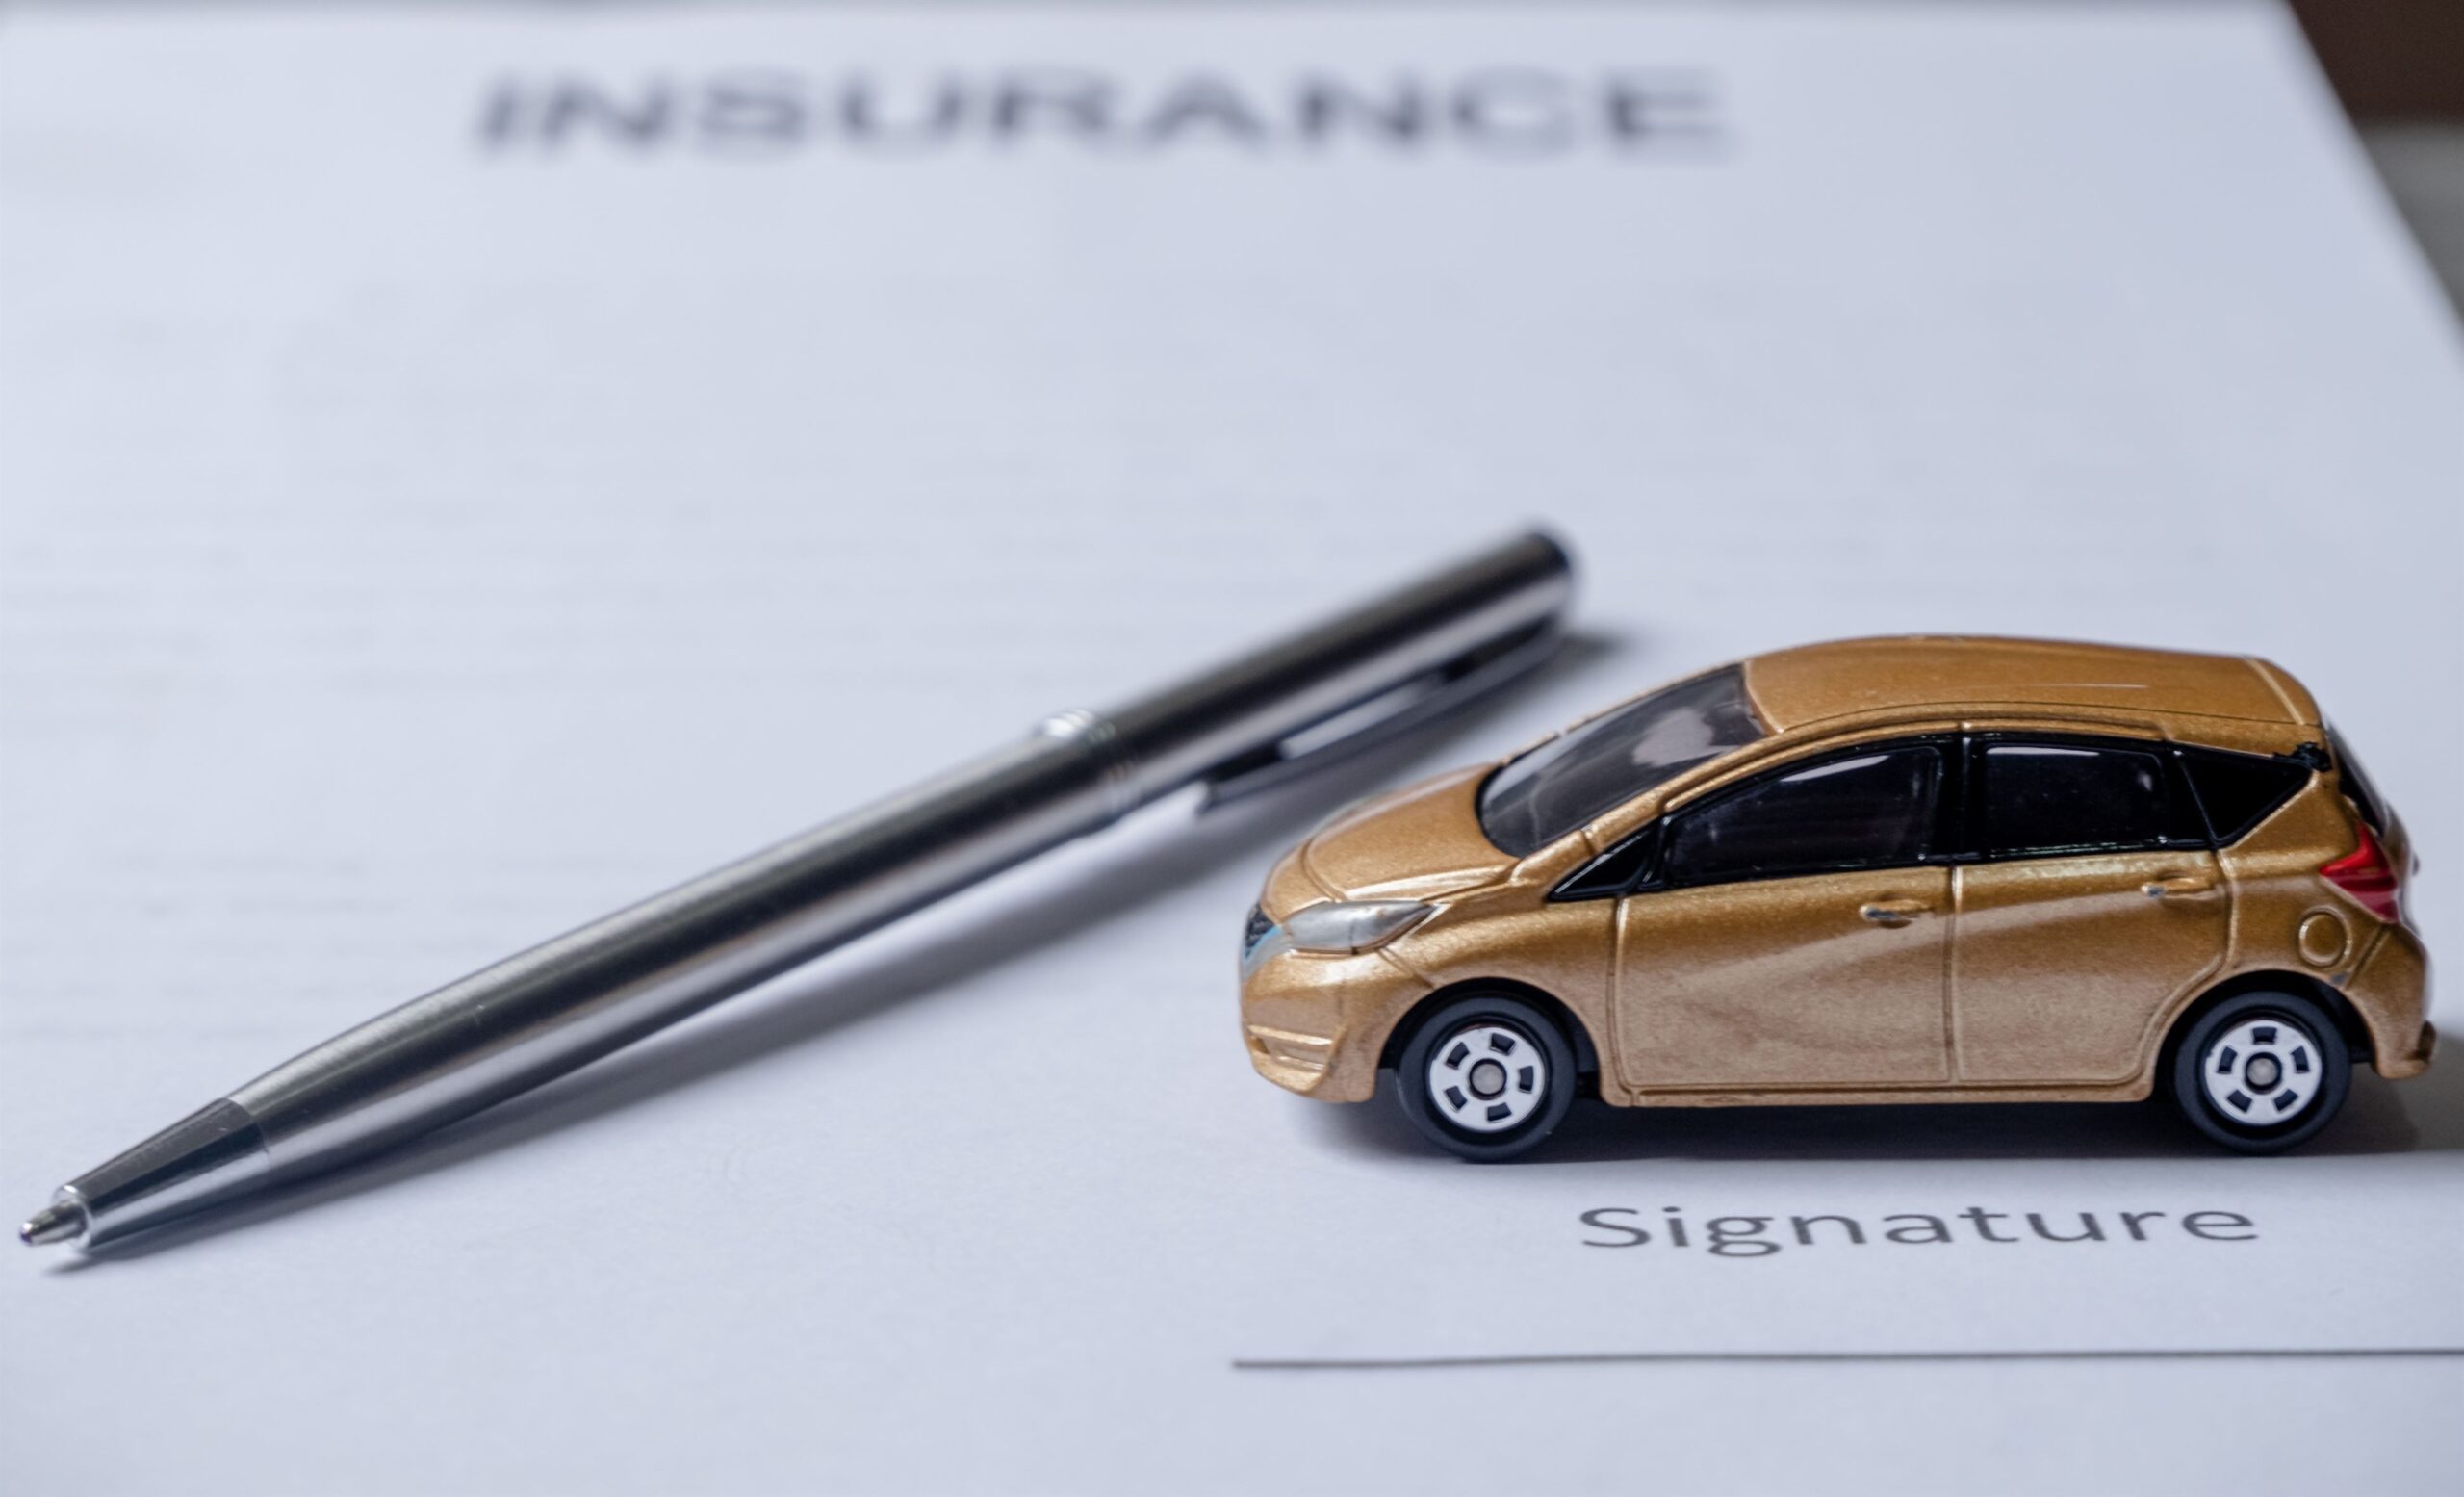 Review Of Otto Insurance (Car Insurance) – Scam Or Legit?